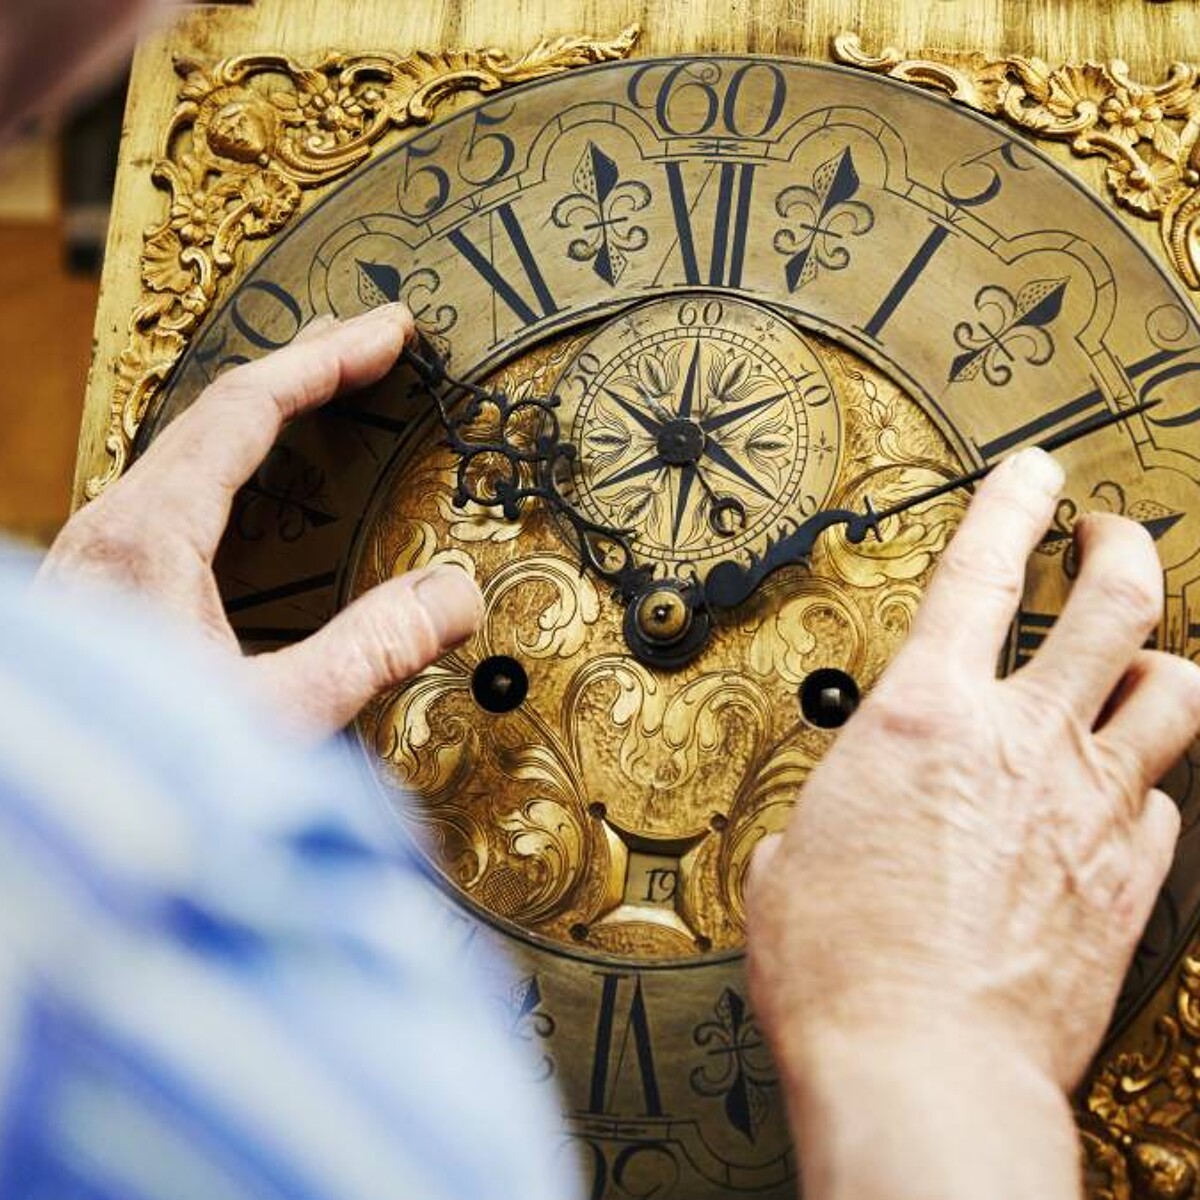 Blog - Antique Clocks: Guide to Set-up and Maintain